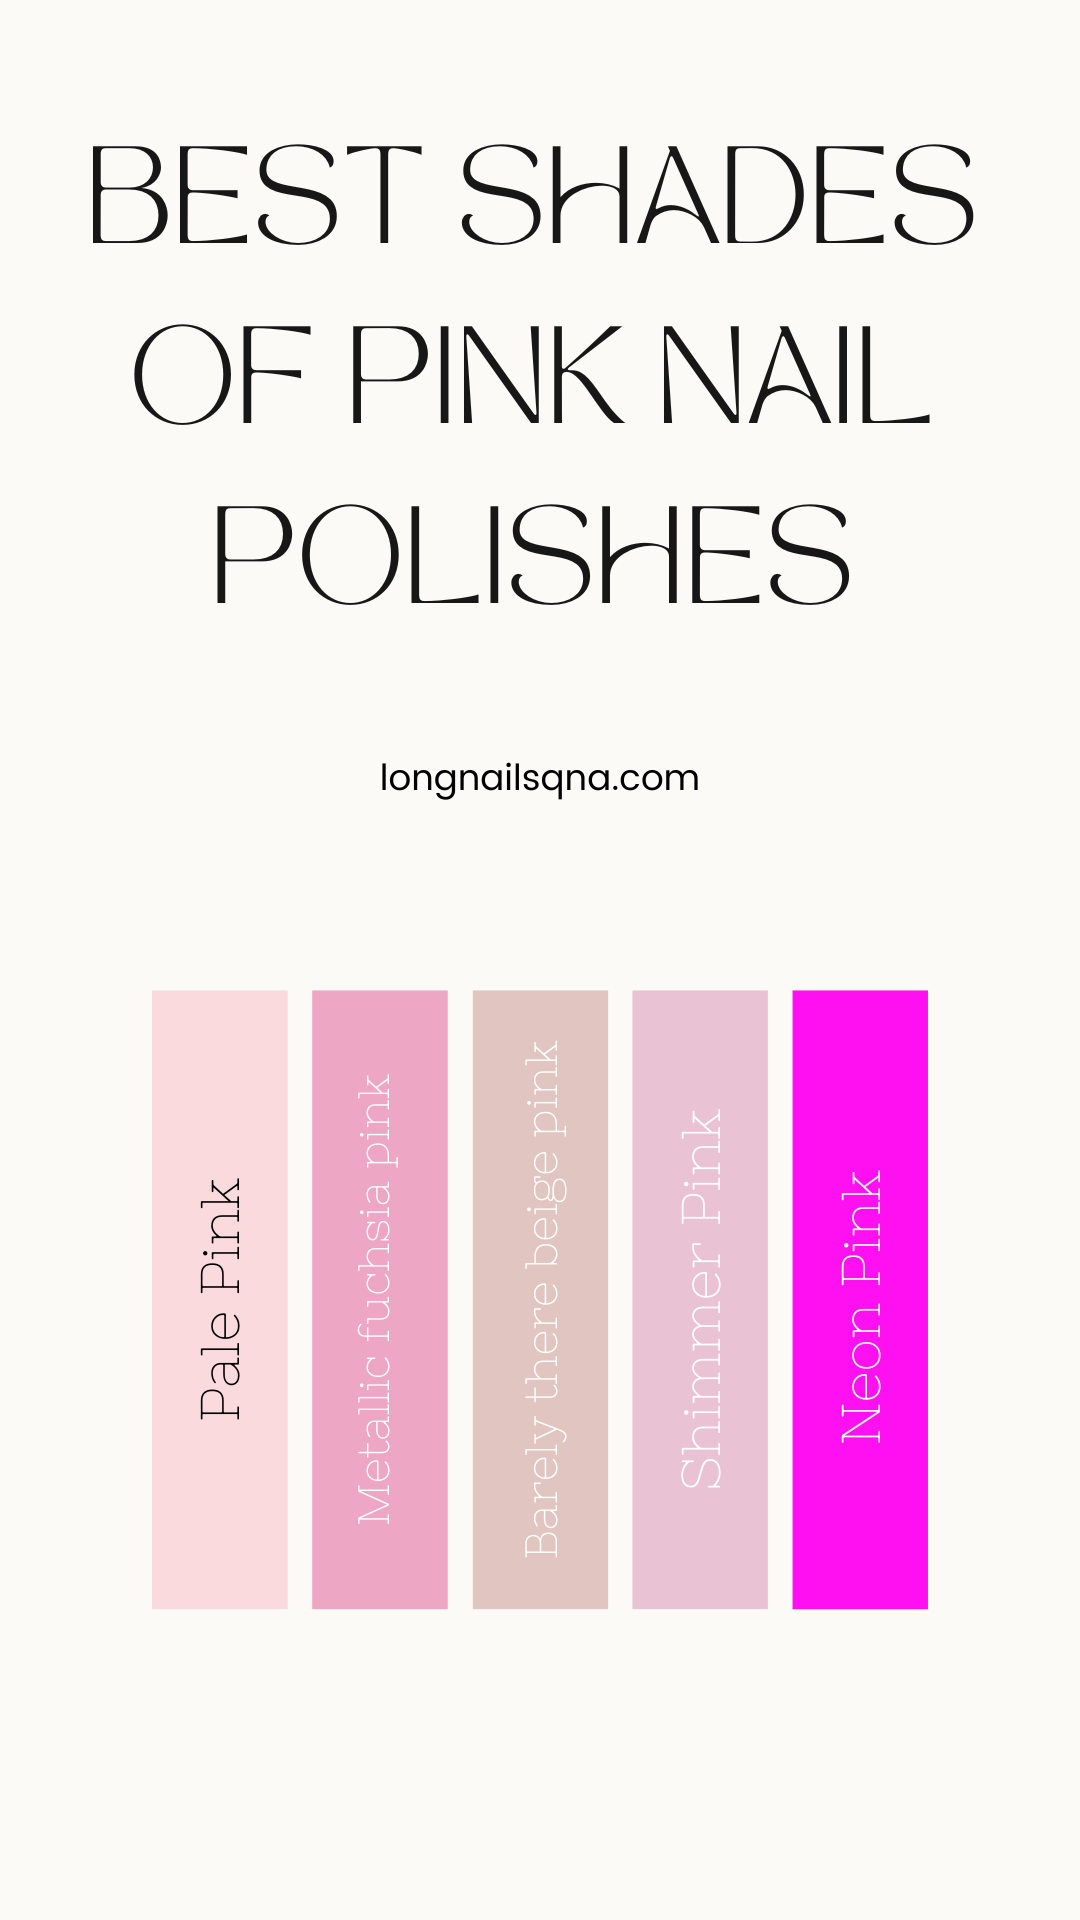 Best Shades of Pink Nail Polishes